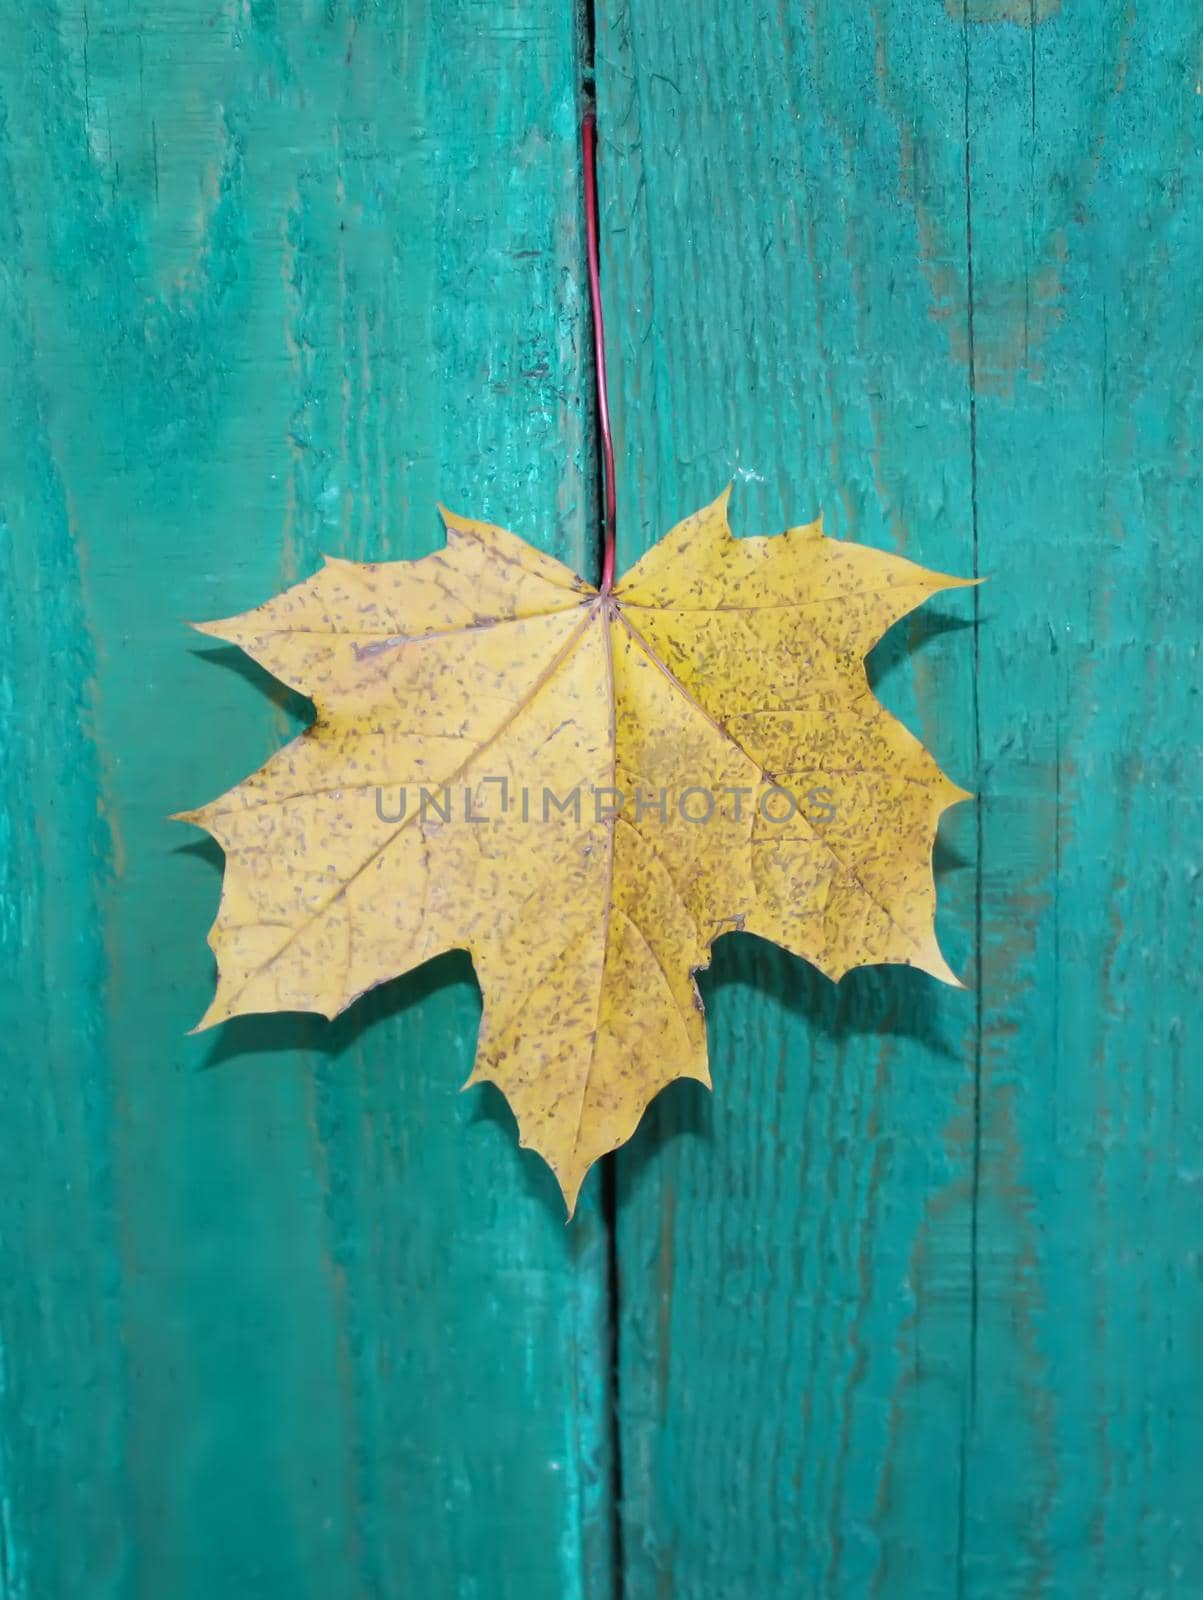 Yellow maple leaf on wooden background outdoors